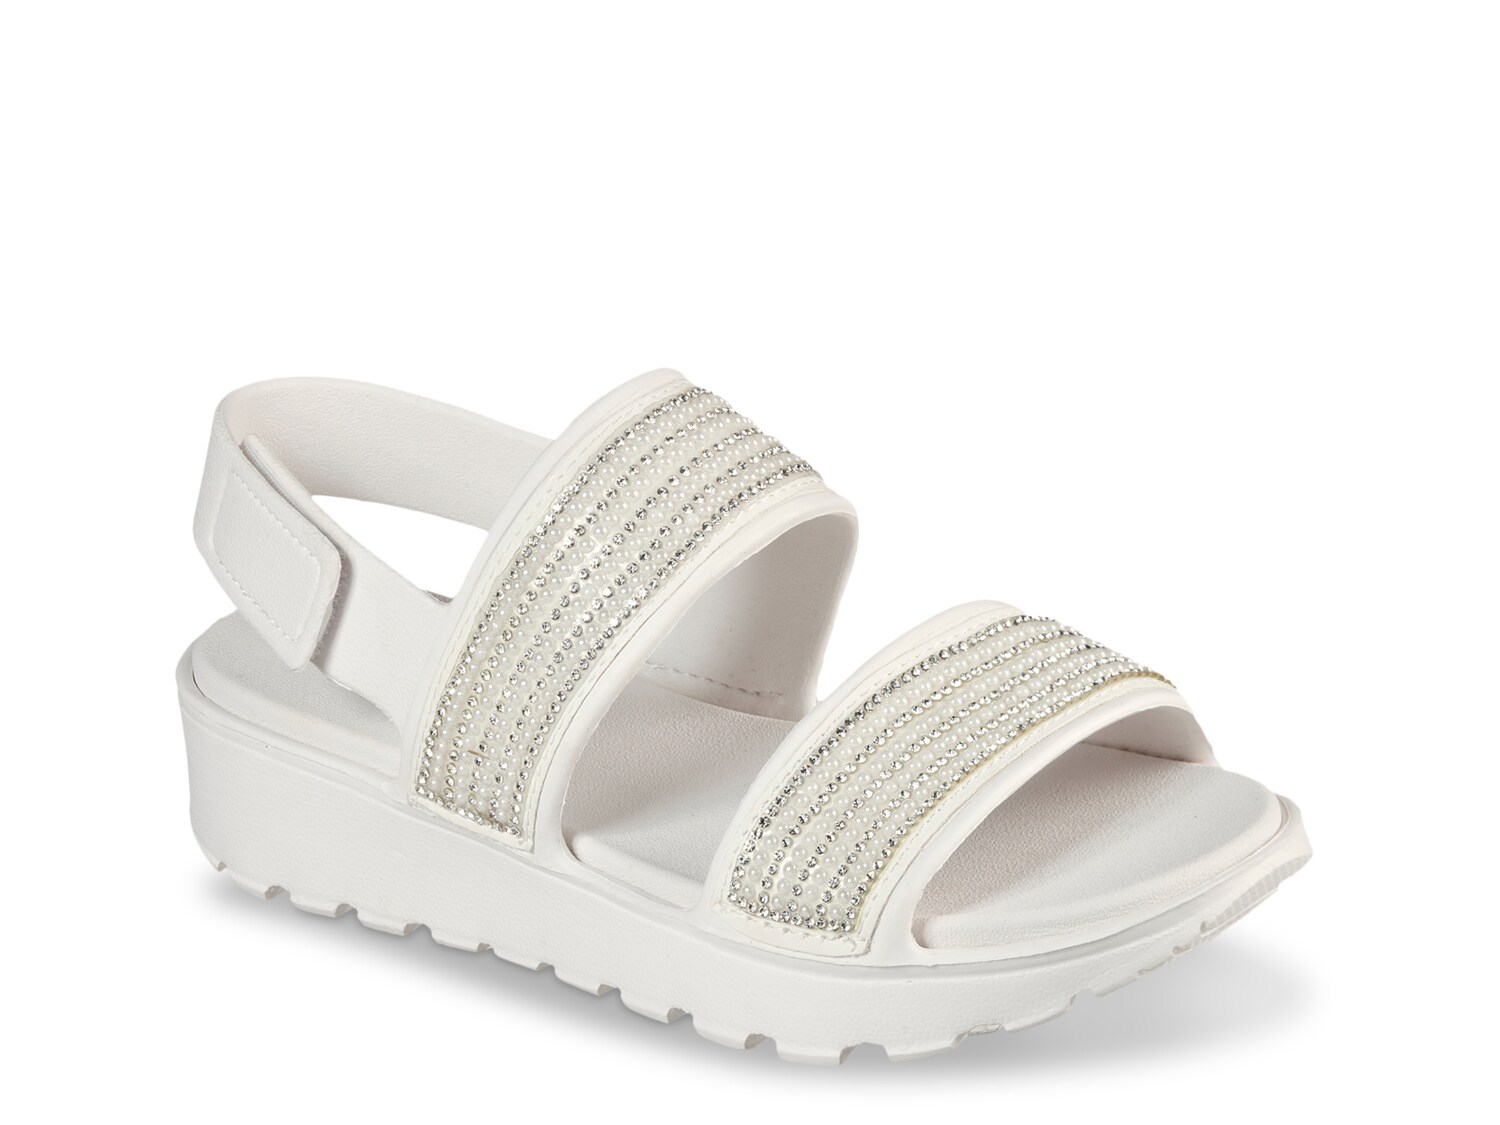 Skechers Foamies Footsteps How Extra Wedge Sandal - Free Shipping | DSW